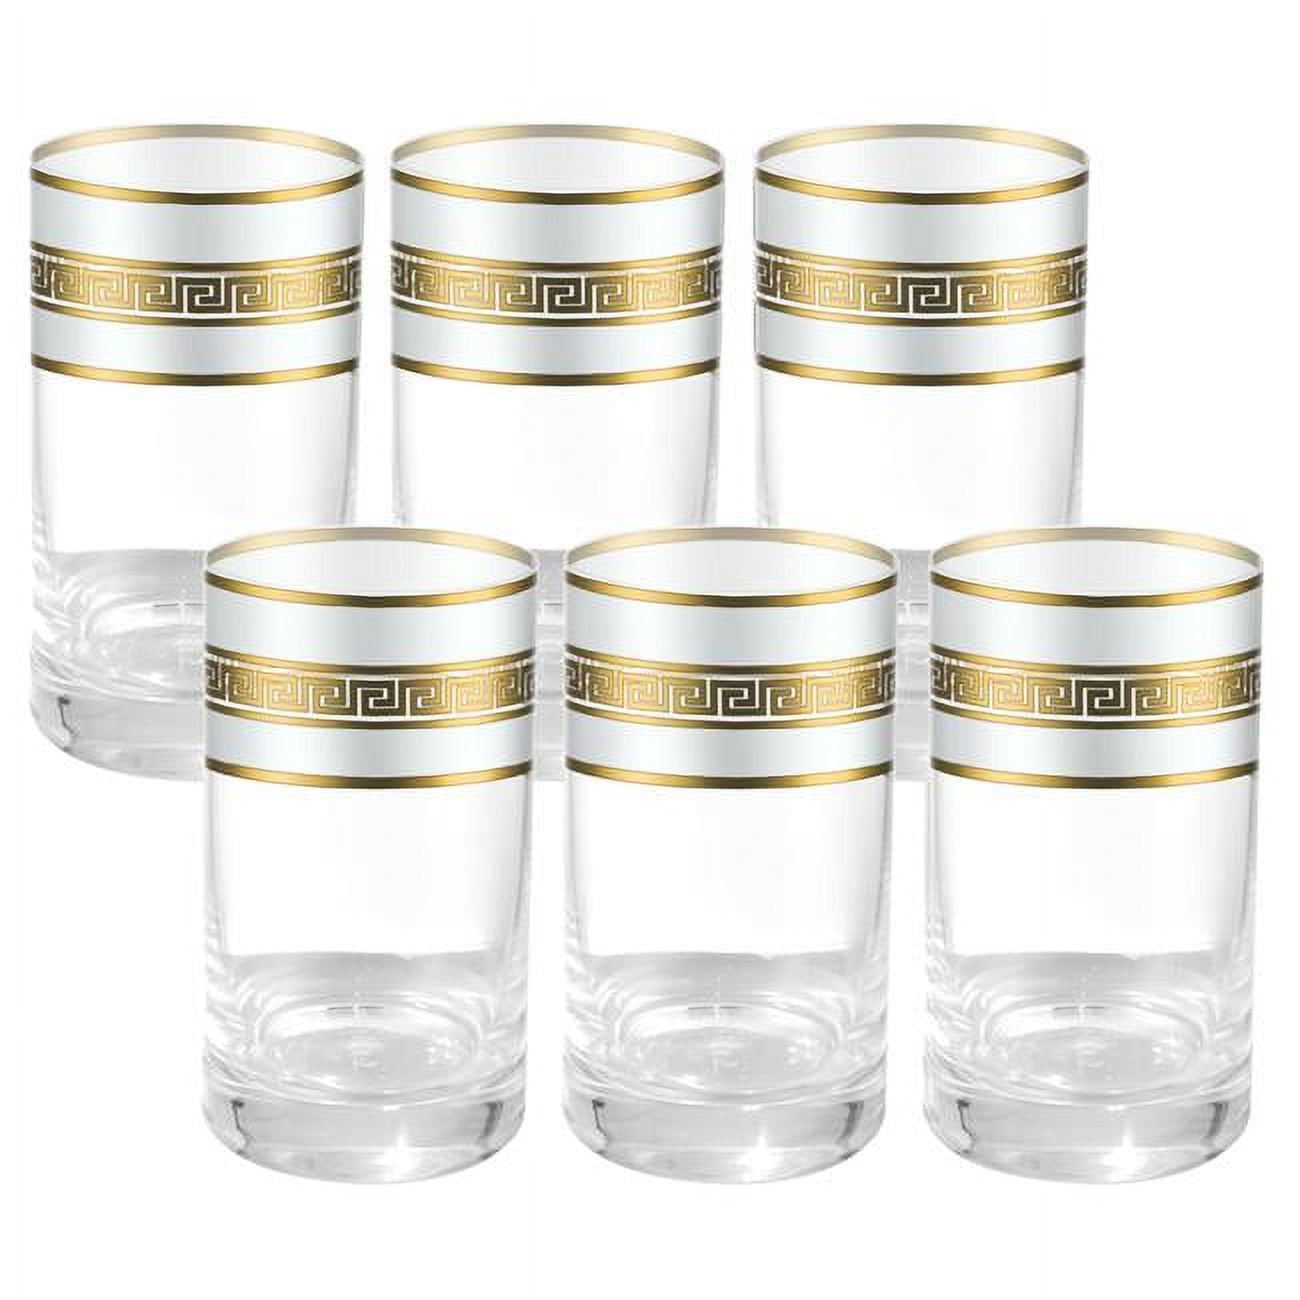 Picture of Brilliant Gifts B3193.013.WH 9.5 oz White Tumblers - Set of 6